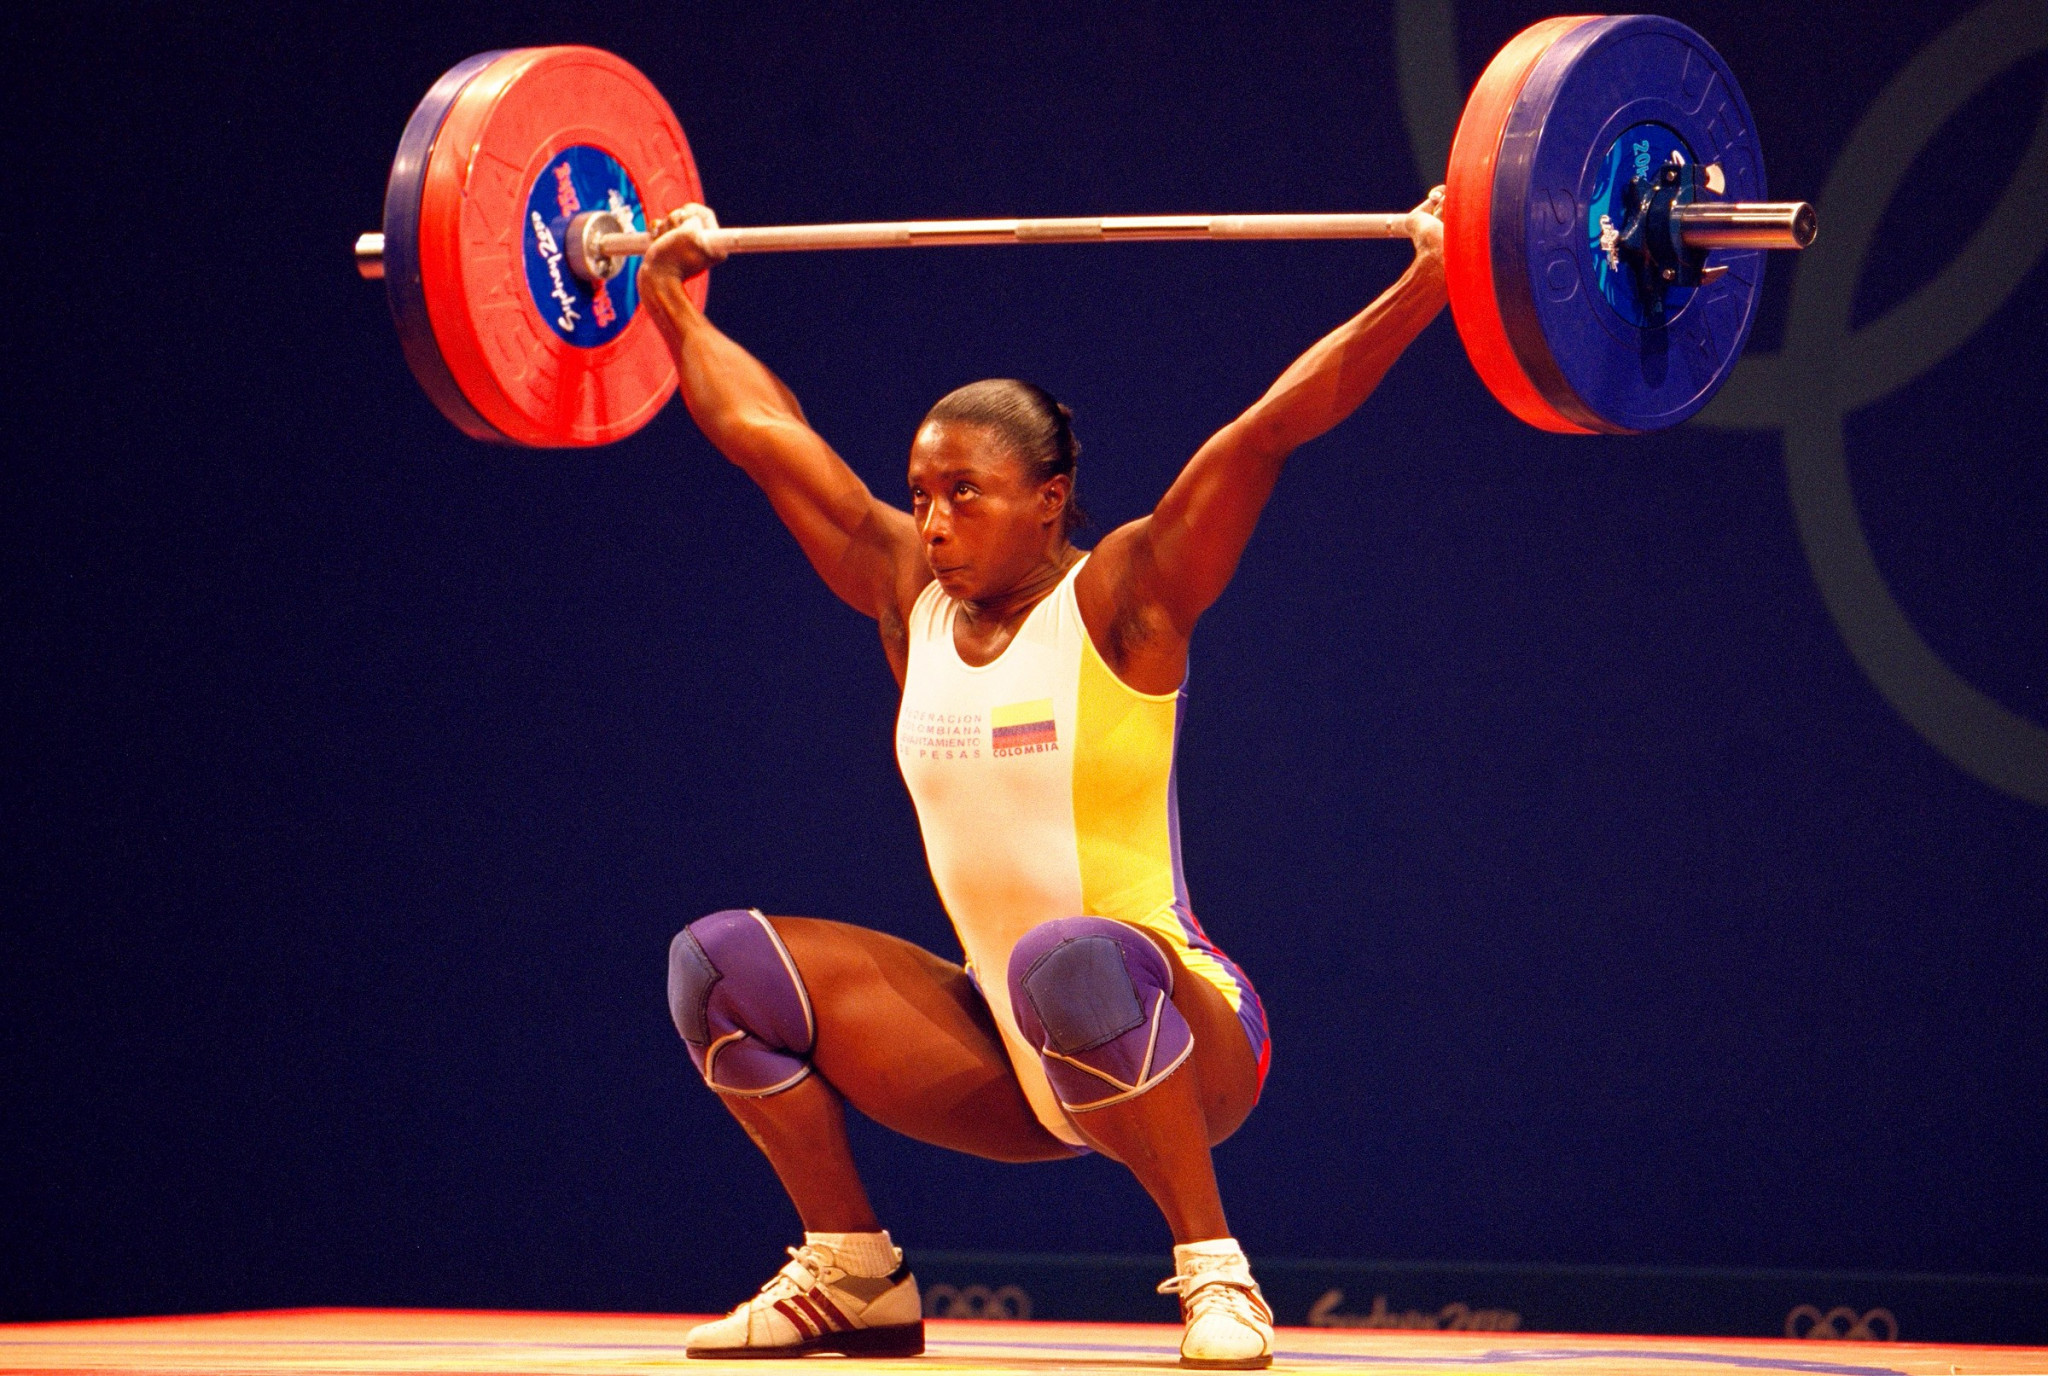 Colombia awarded weightlifting World Championships - 10 months after facing ban